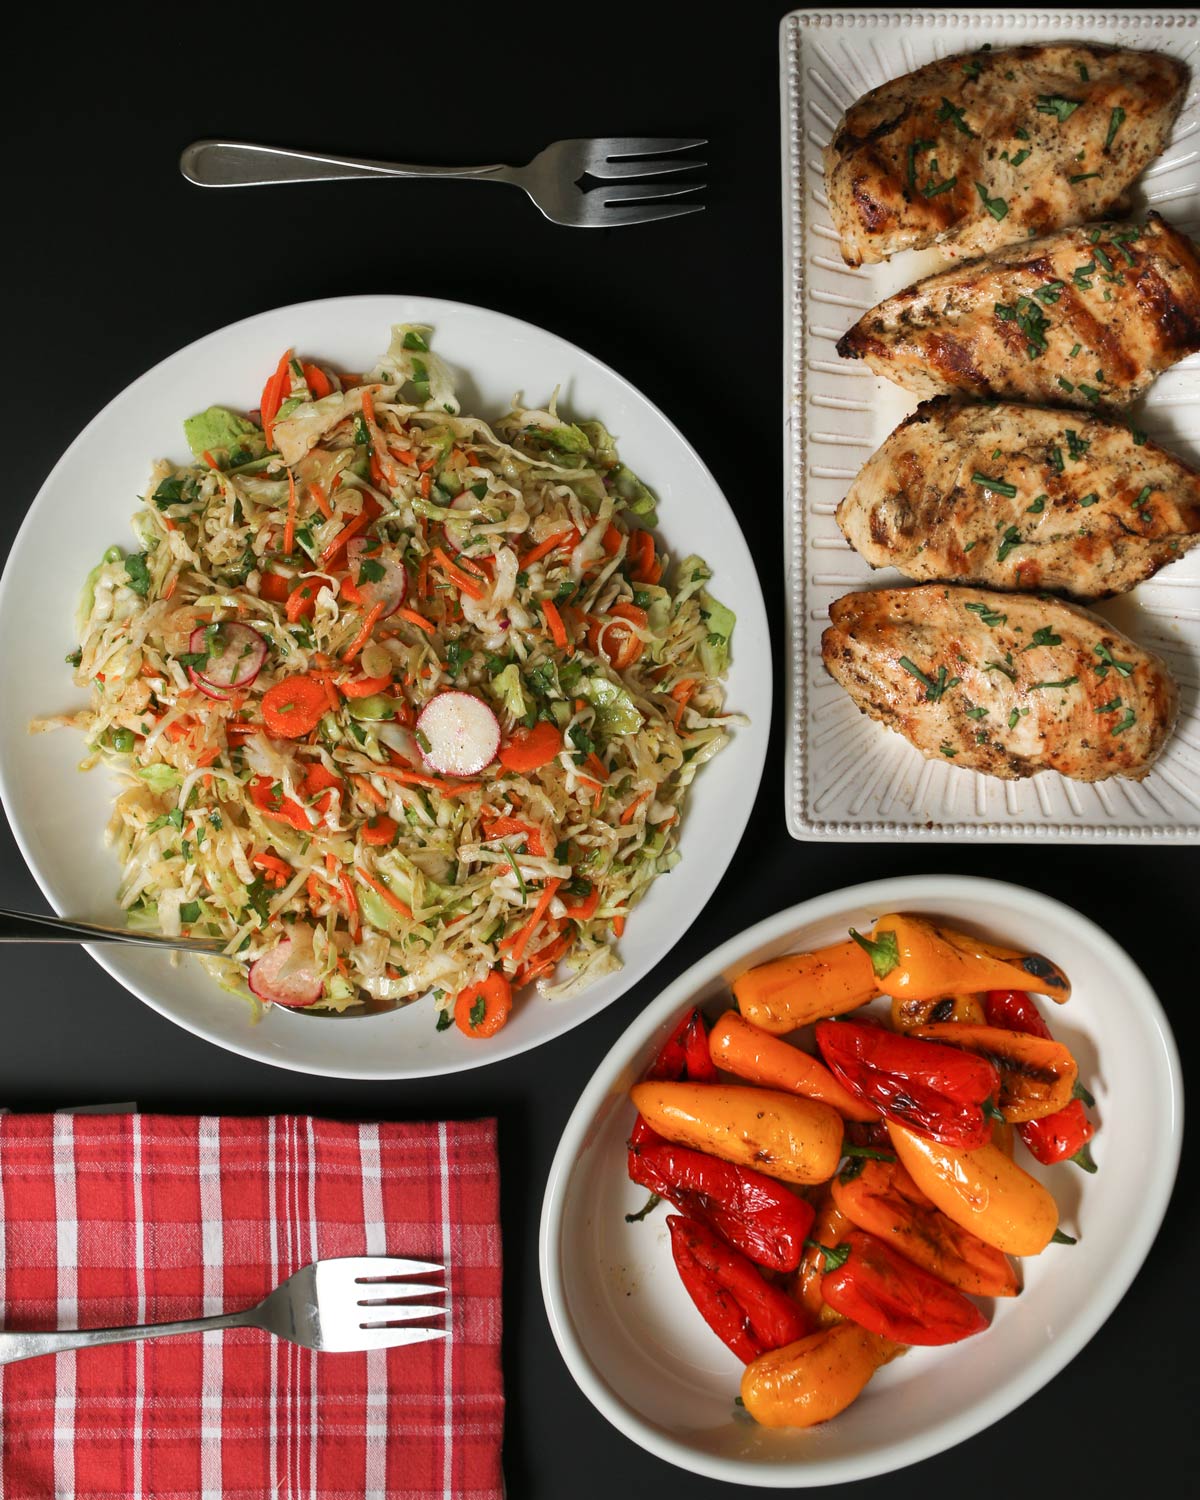 dinner table set with bowl of Mexican coleslaw, platter of grilled chicken, and platter of grilled mini peppers.